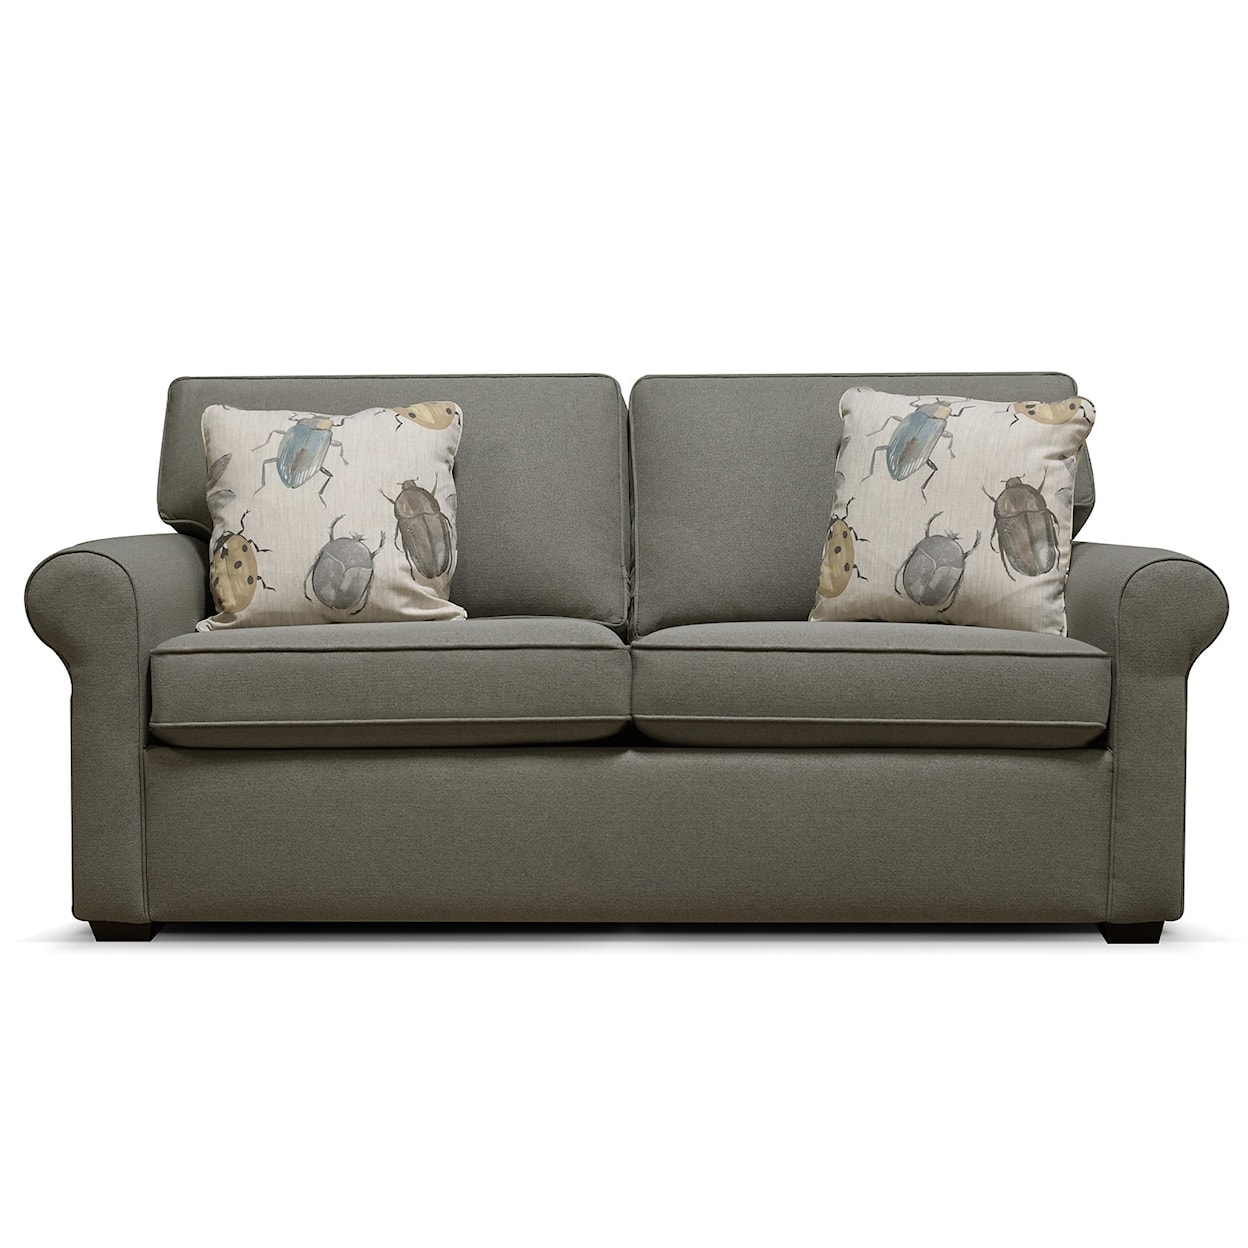 Tennessee Custom Upholstery 400 Series Sofa with Full Pullout Bed